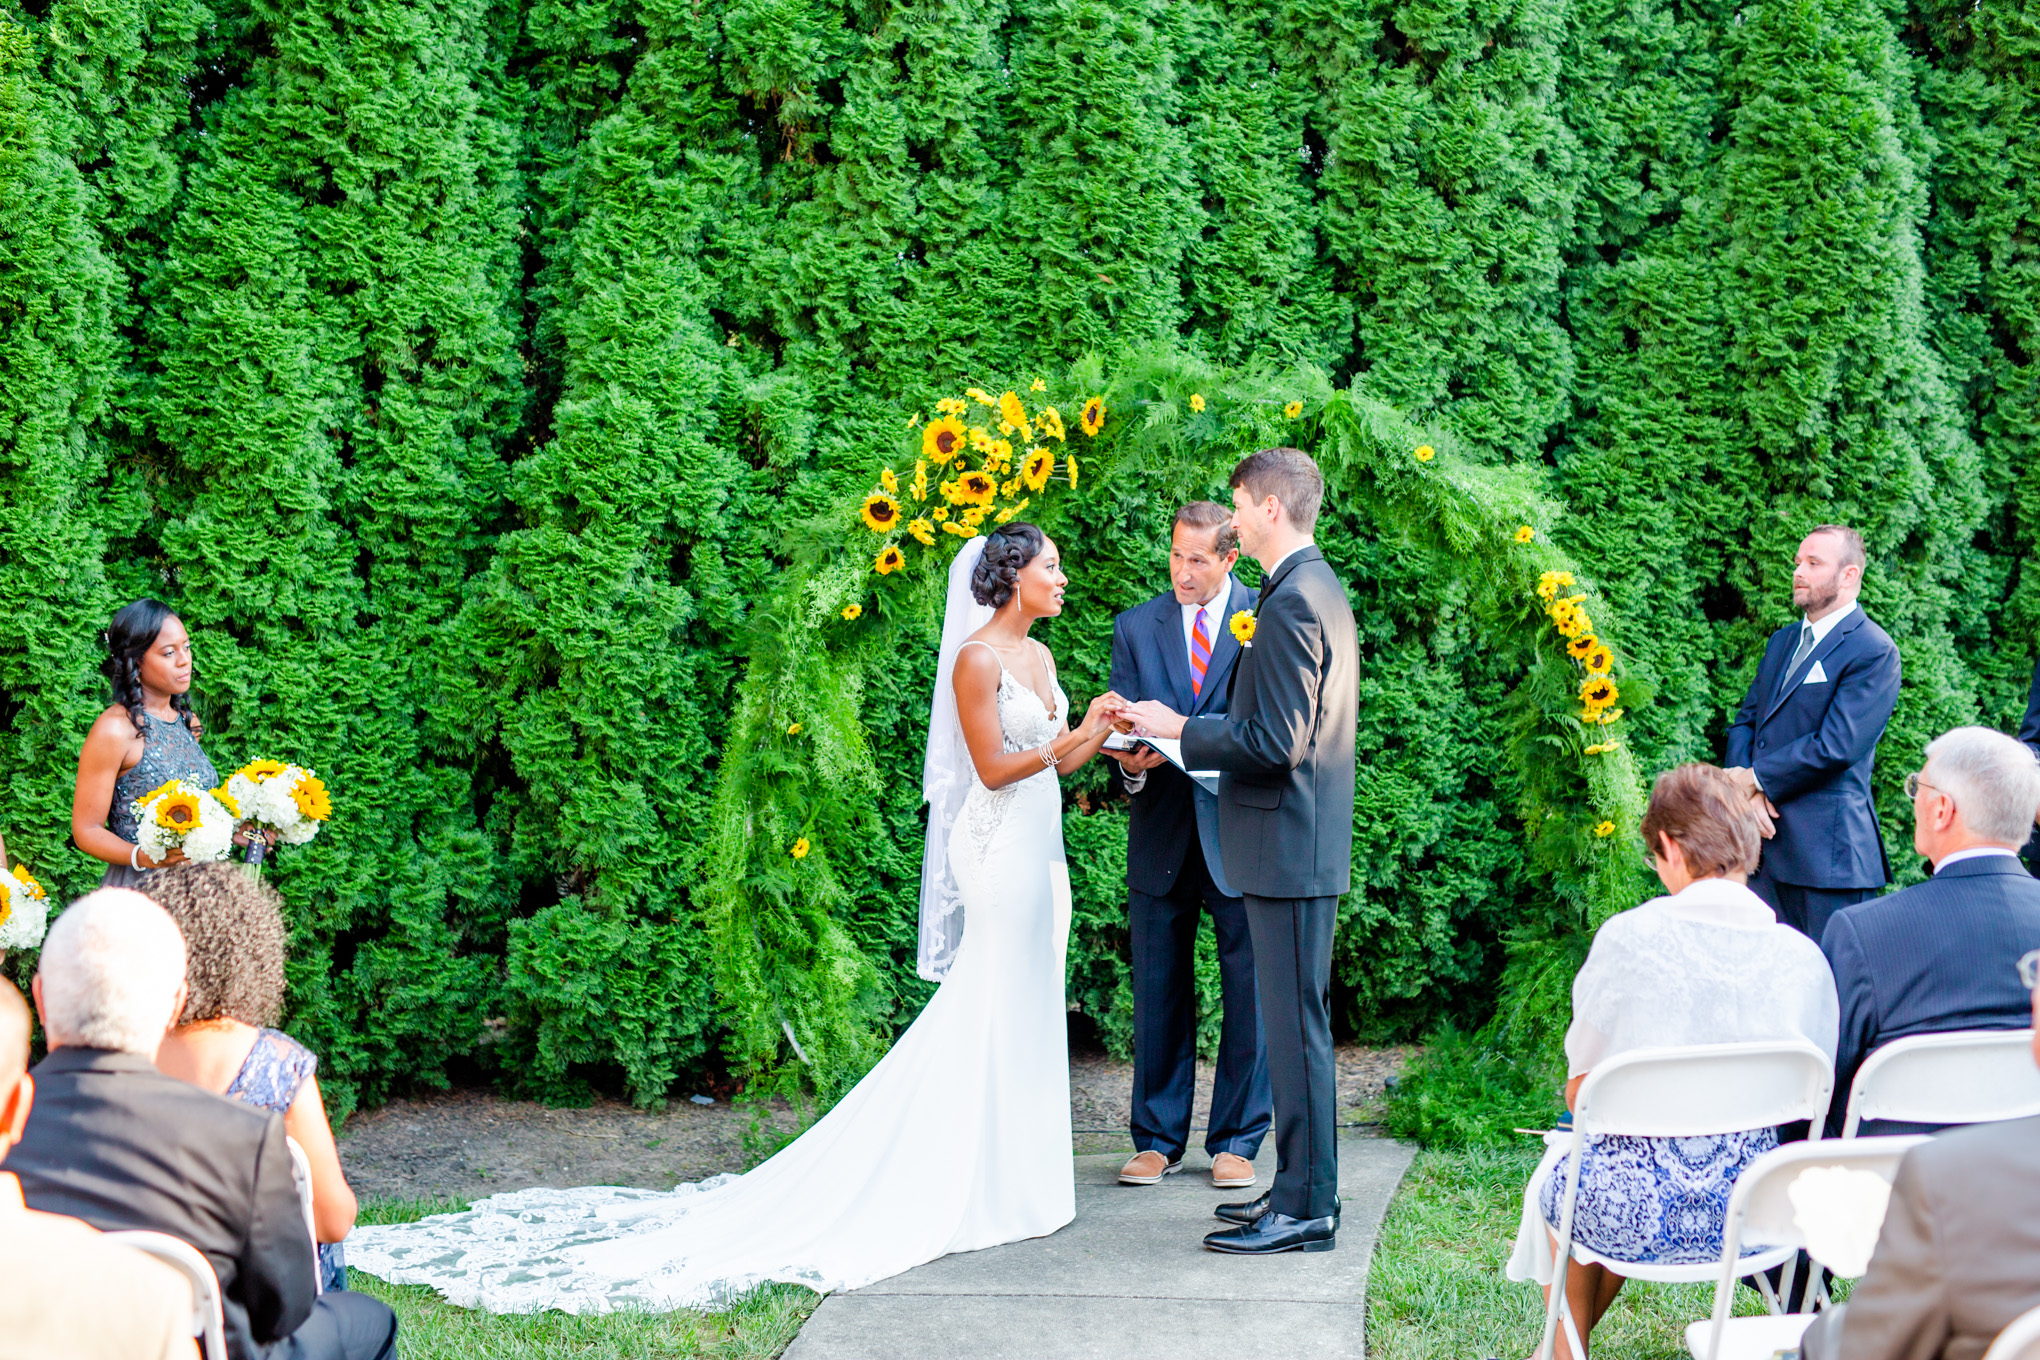 summer mansion at valley country club wedding, Maryland wedding, MD wedding, Maryland wedding photographer, summer wedding, summer wedding inspiration, Baltimore wedding photographer, DC wedding photographer, country club wedding, yellow aesthetic, Rachel E.H. Photography, couple exchanging rings